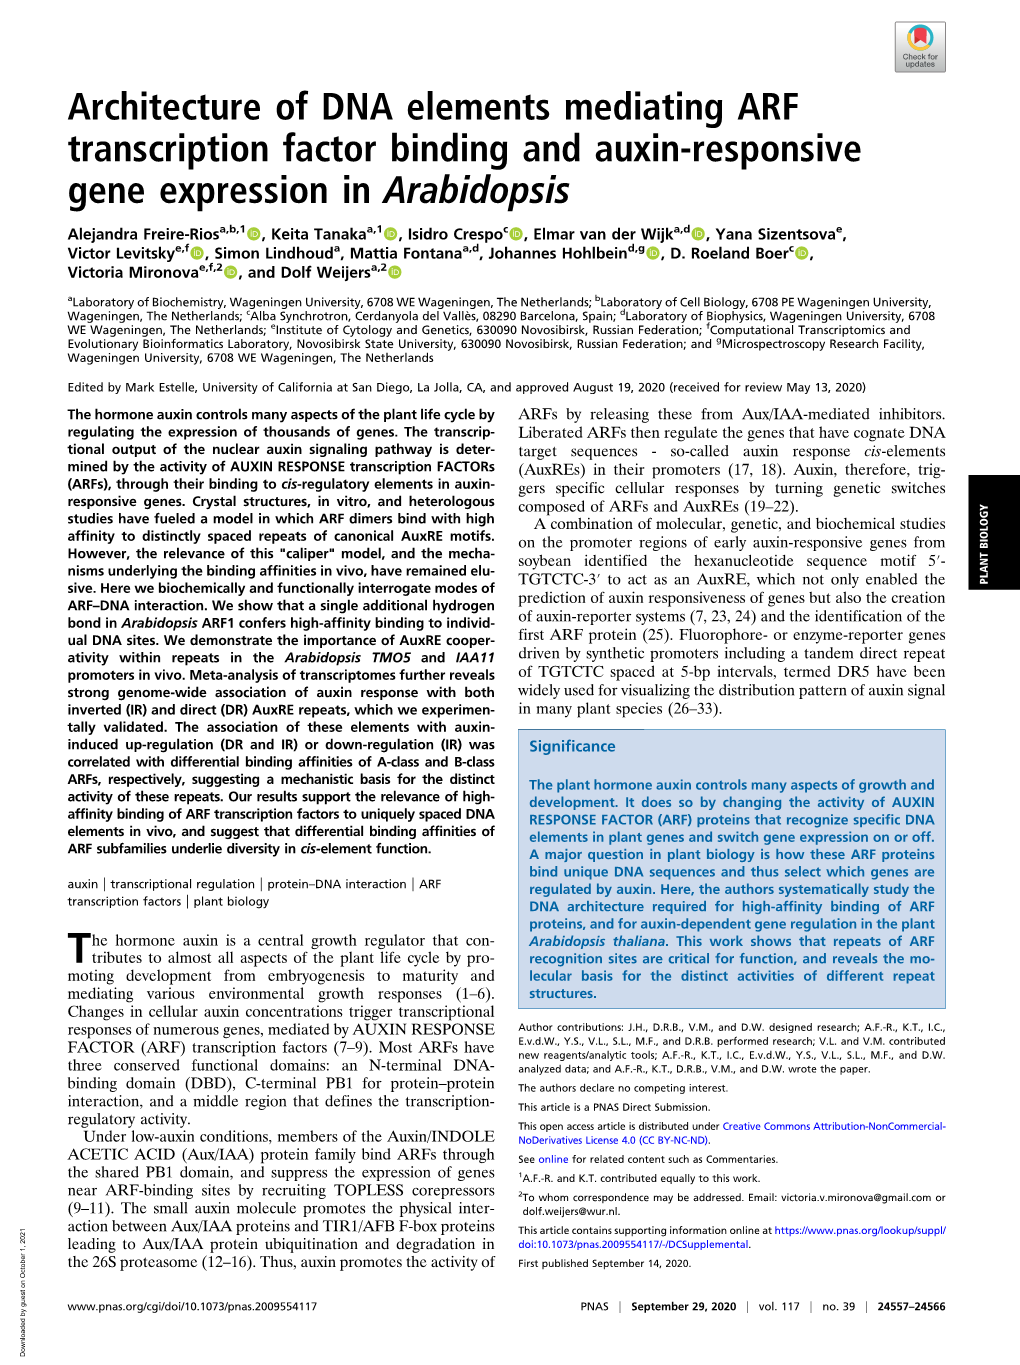 Architecture of DNA Elements Mediating ARF Transcription Factor Binding and Auxin-Responsive Gene Expression in Arabidopsis